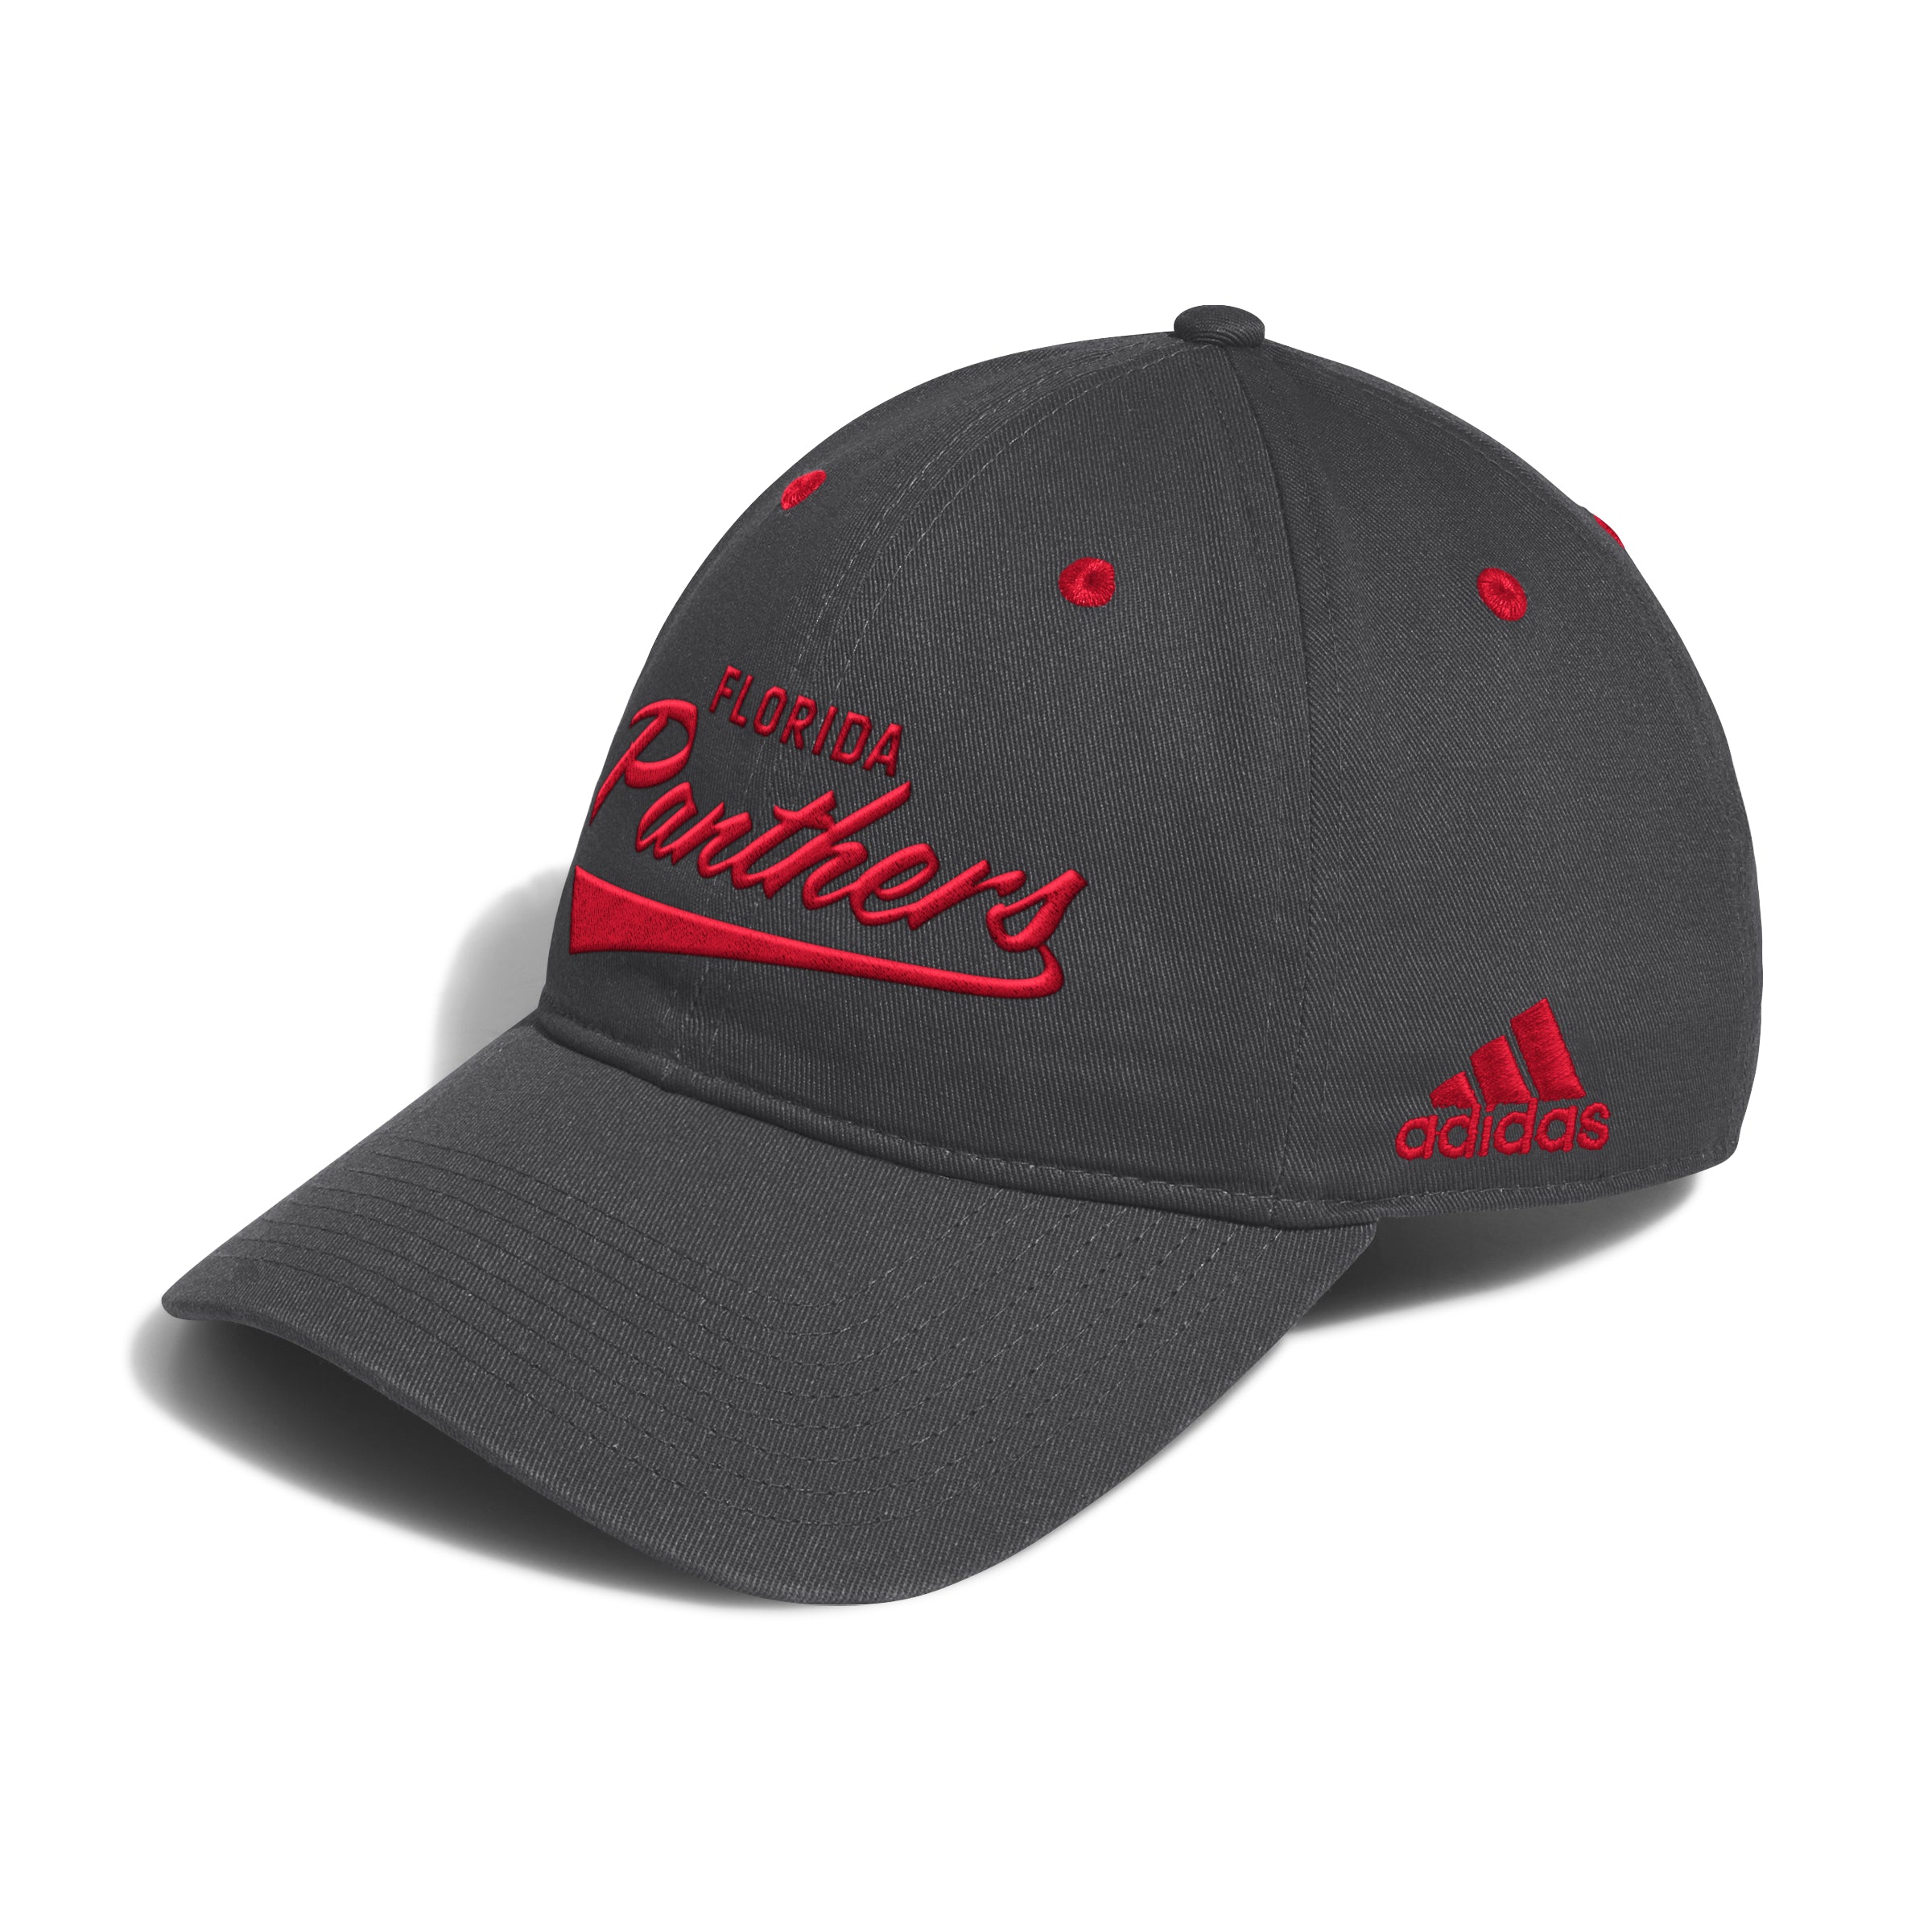 Florida Panthers adidas Adjustable Unstructured Slouch Hat - Dark Grey